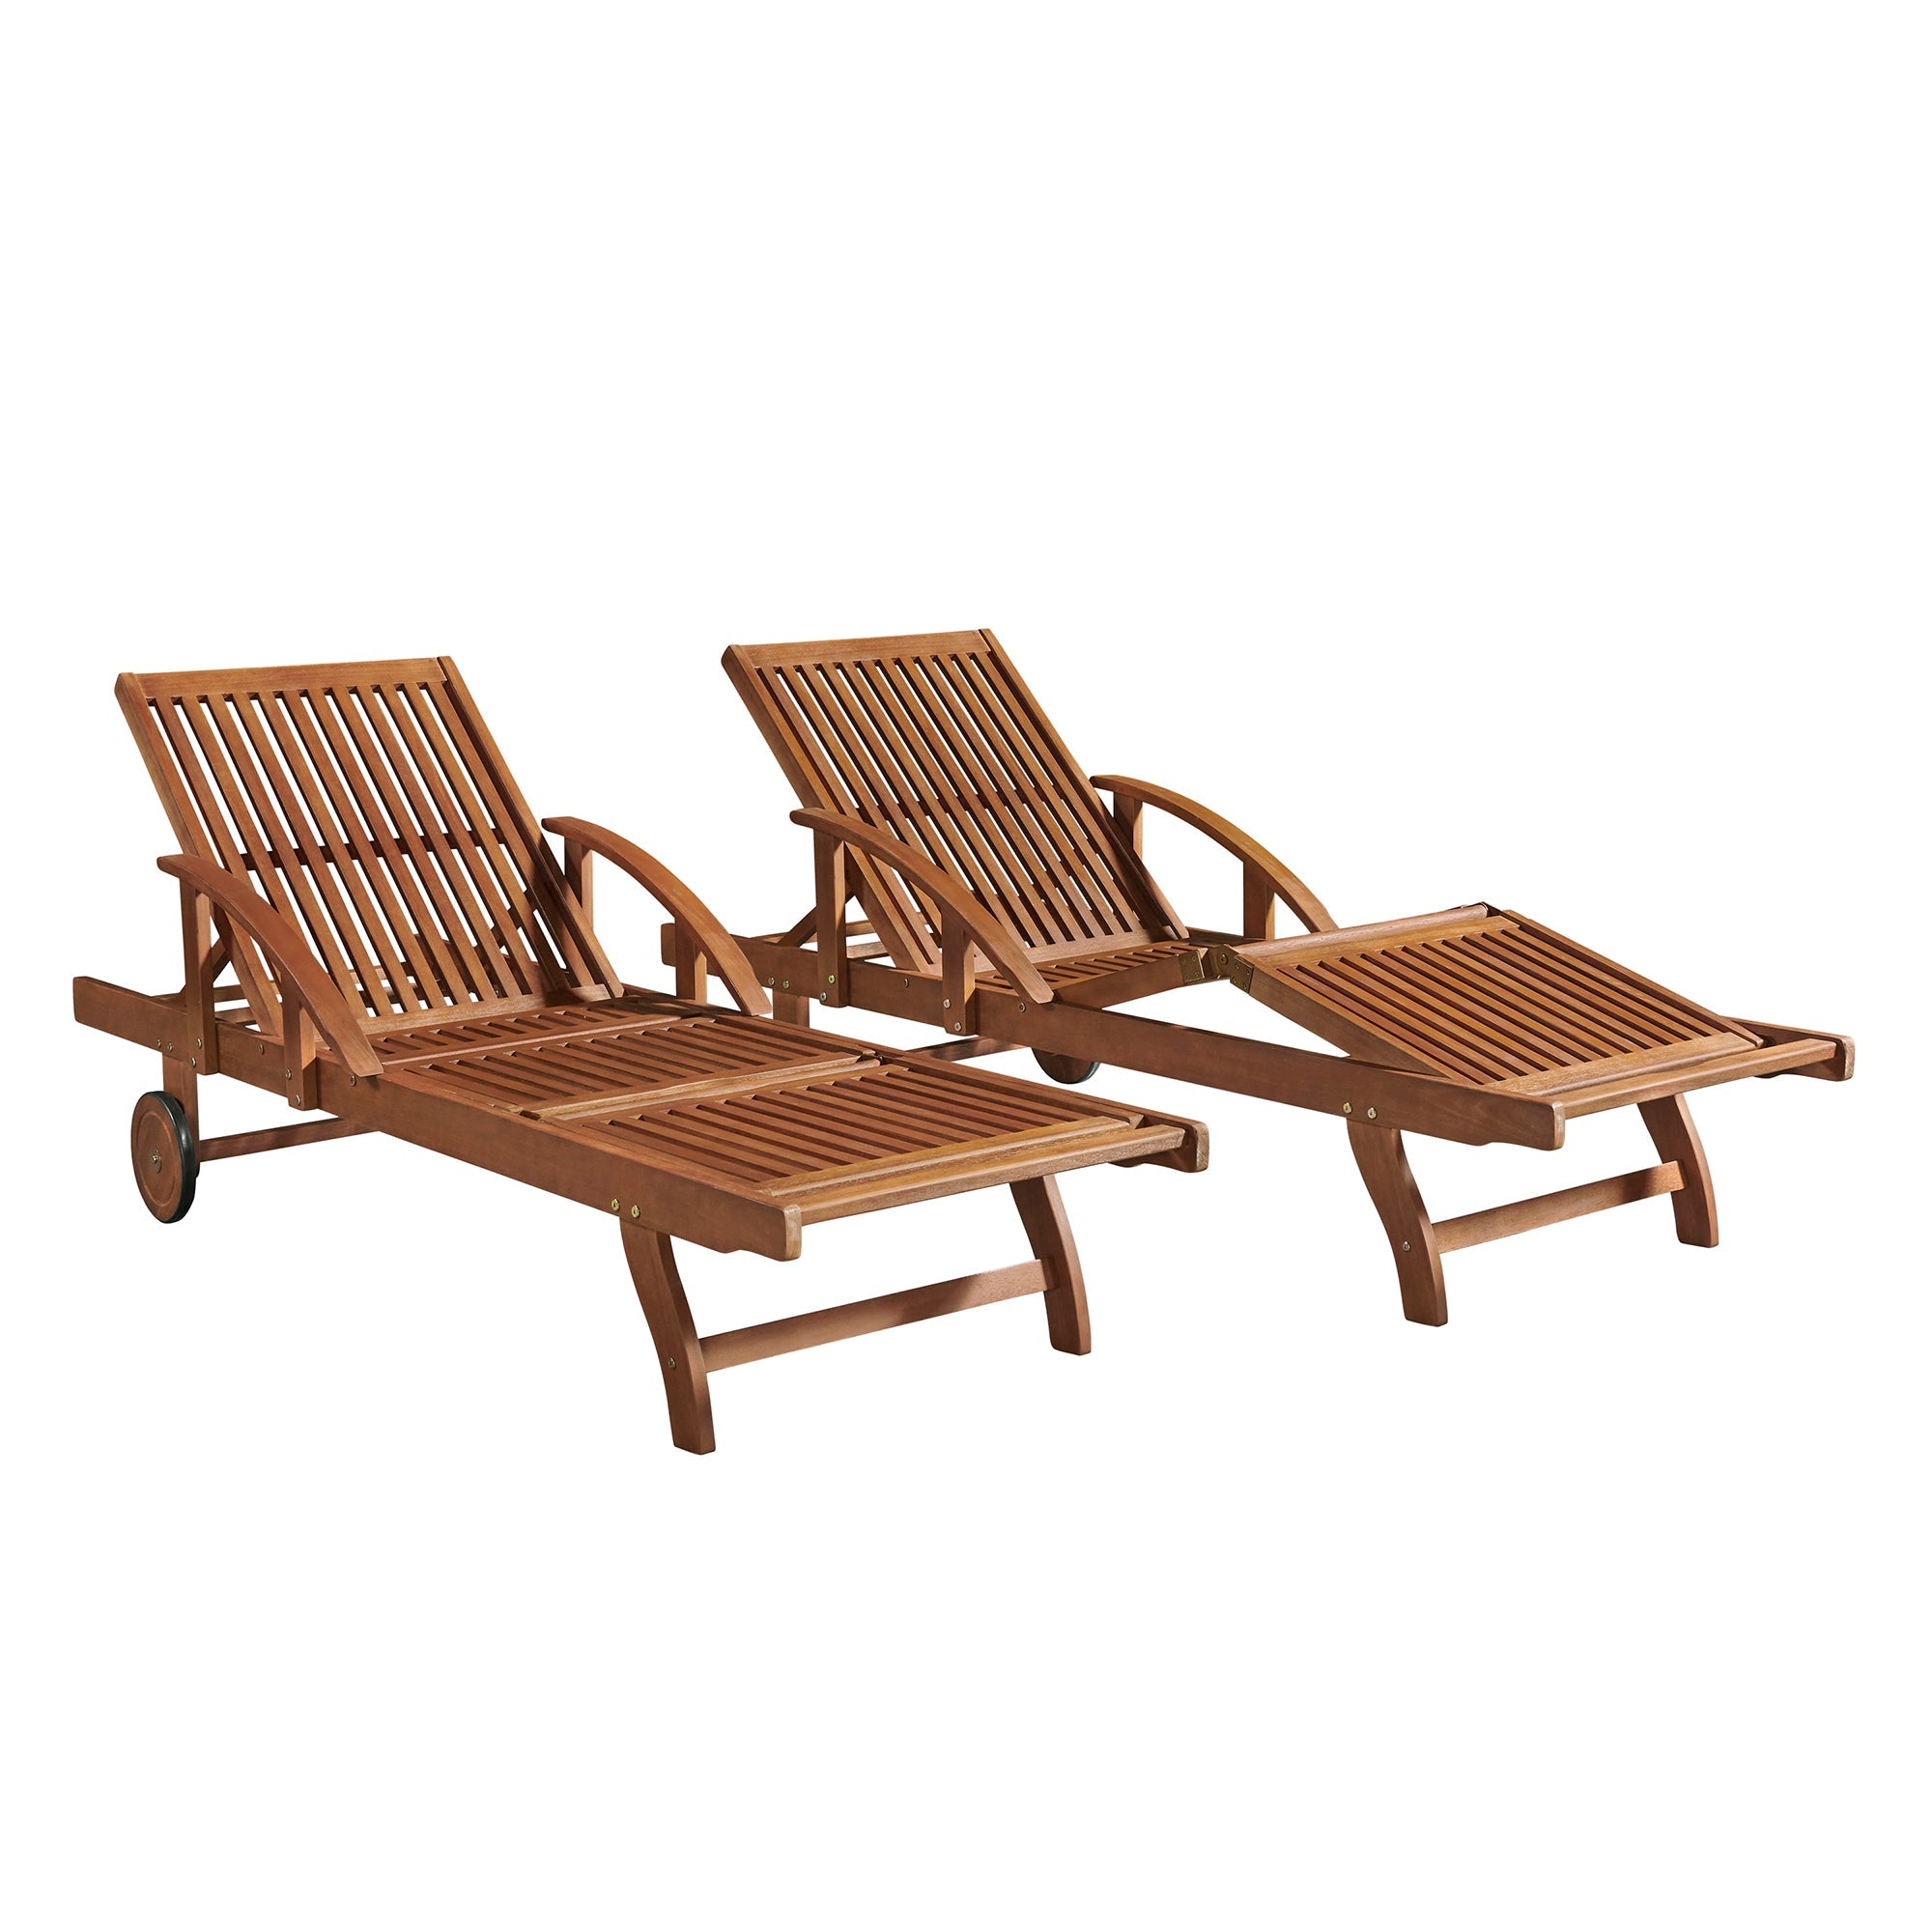 Light Brown Oil Caspian Eucalyptus Wood Outdoor Lounge Chair with Arms and Adjustable Leg Rest, Set of 2 - Outdoor Seating